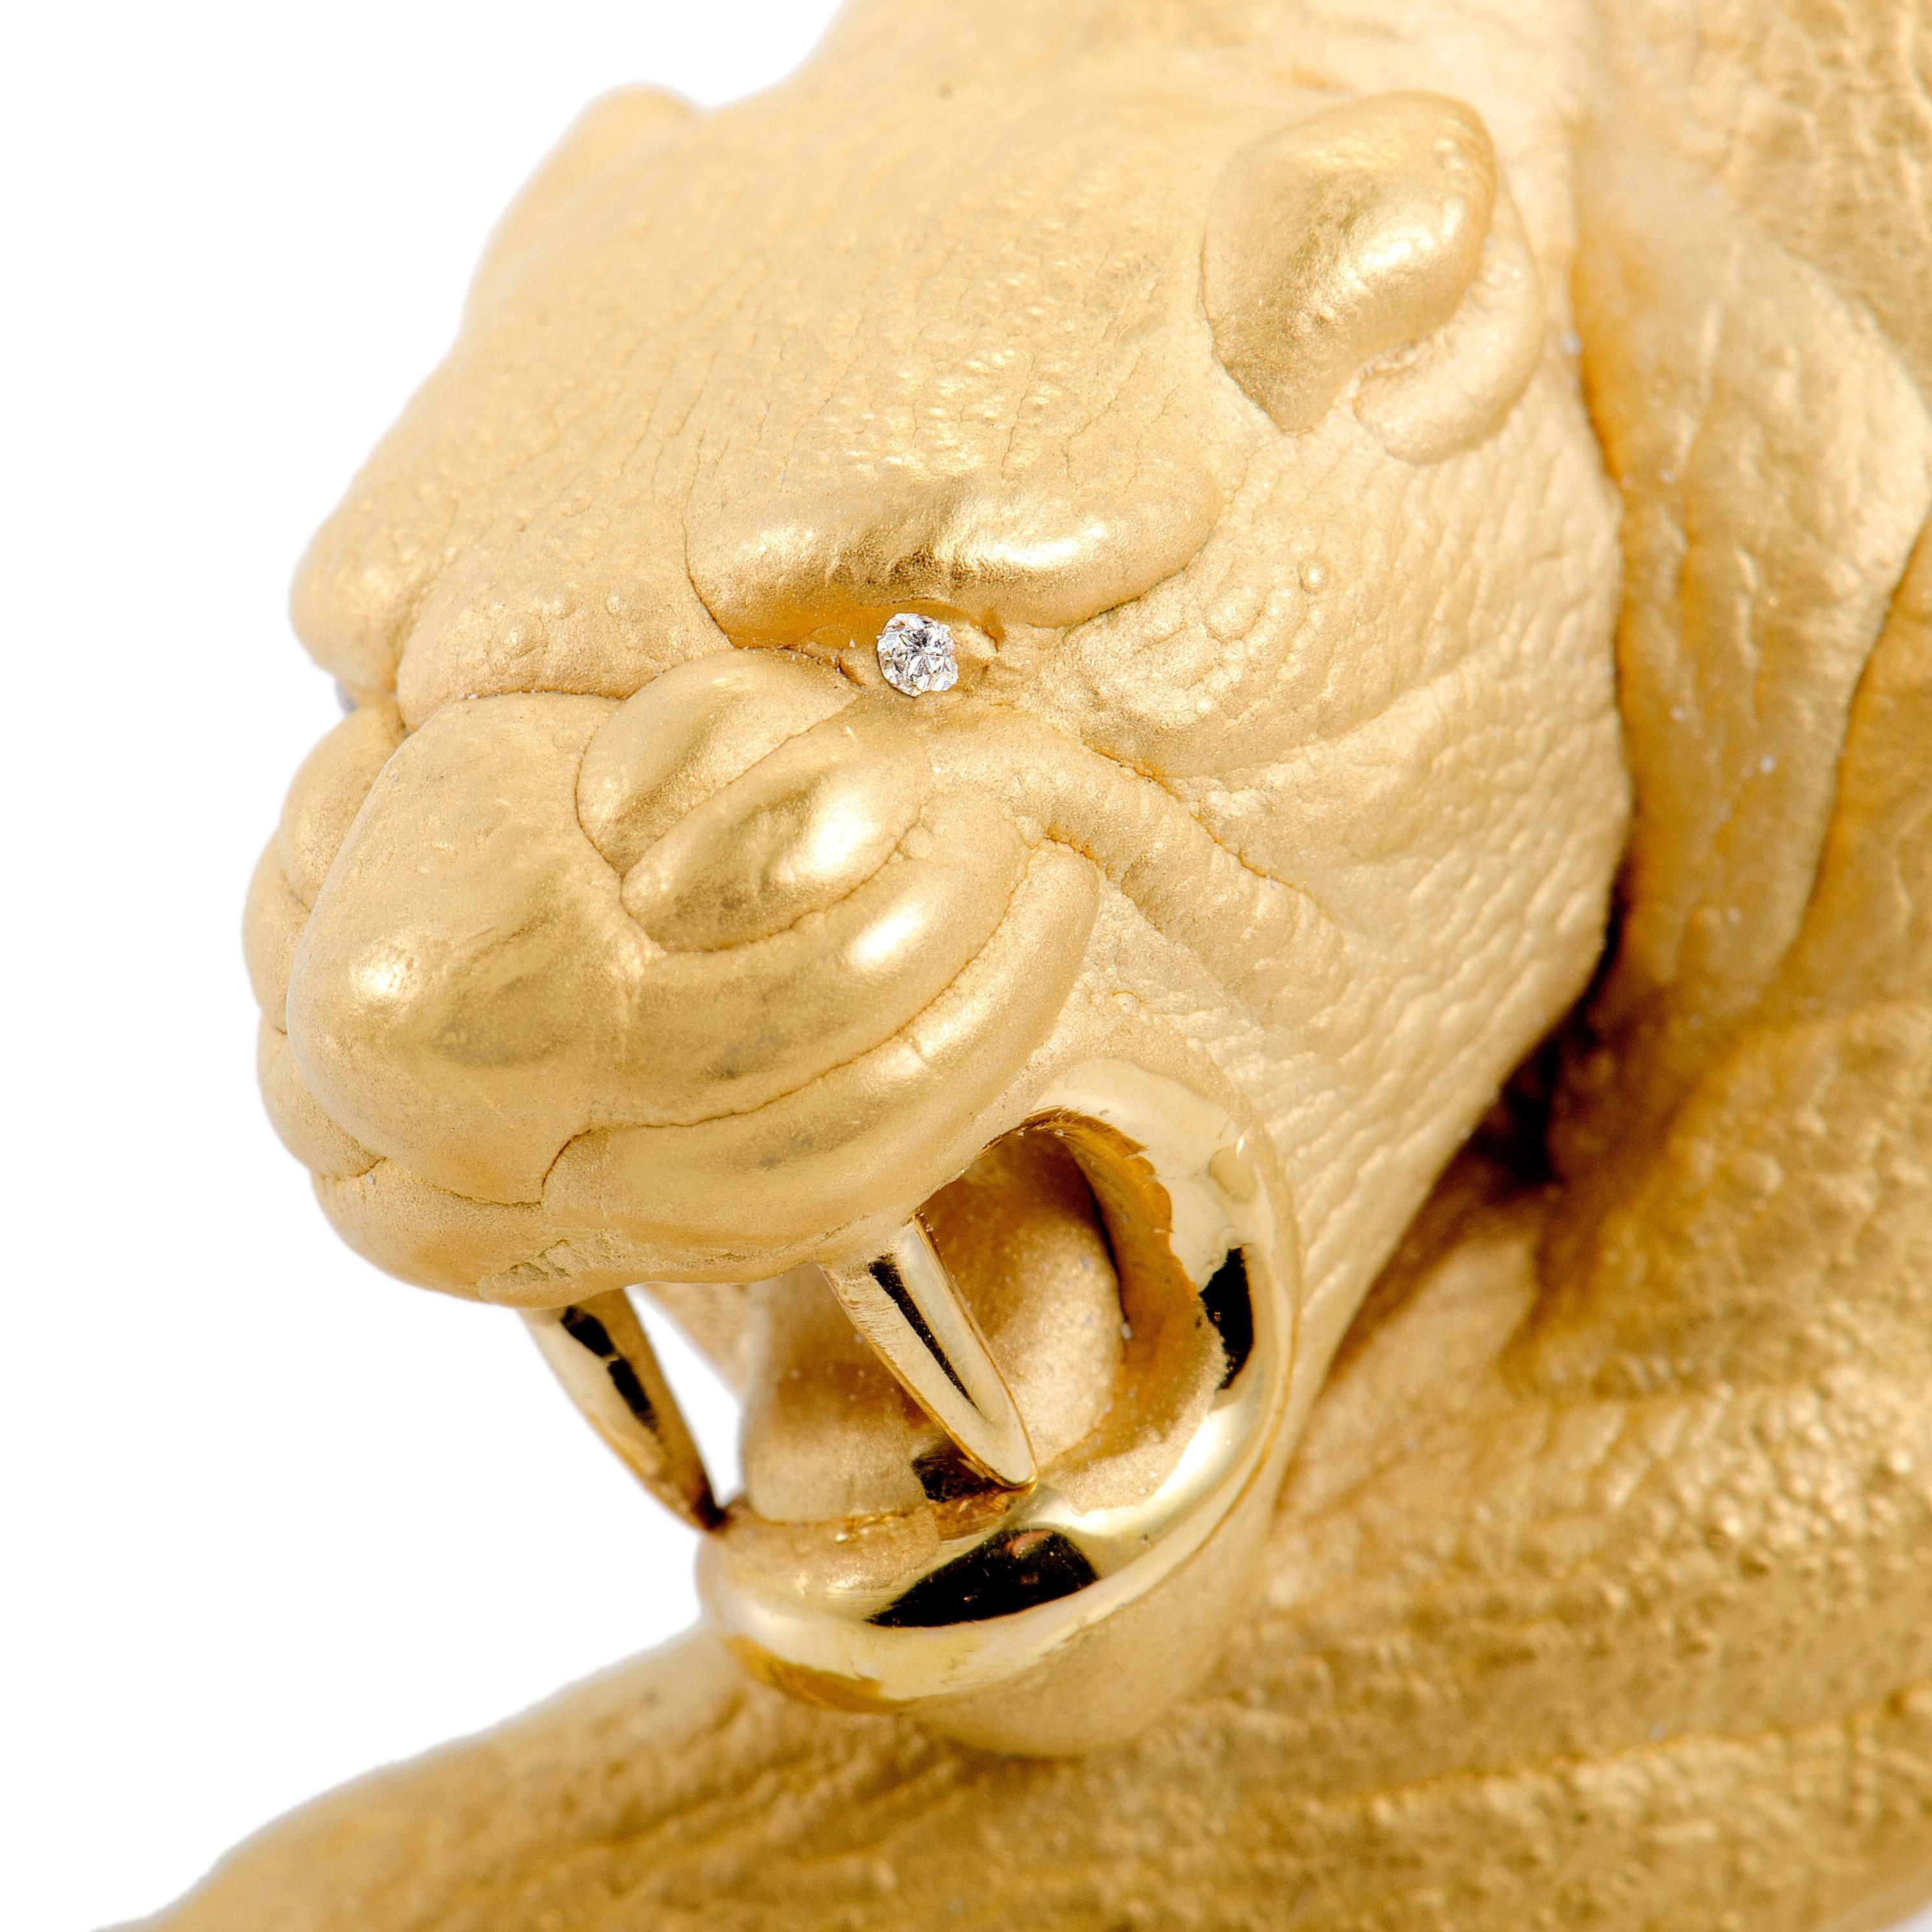 Majestic, daring and highly renowned, the brand's emblematic motif of a panther is employed in an extraordinary manner in this outstanding necklace from Carrera y Carrera which is made of radiant 18K yellow gold and set with fascinating diamonds as